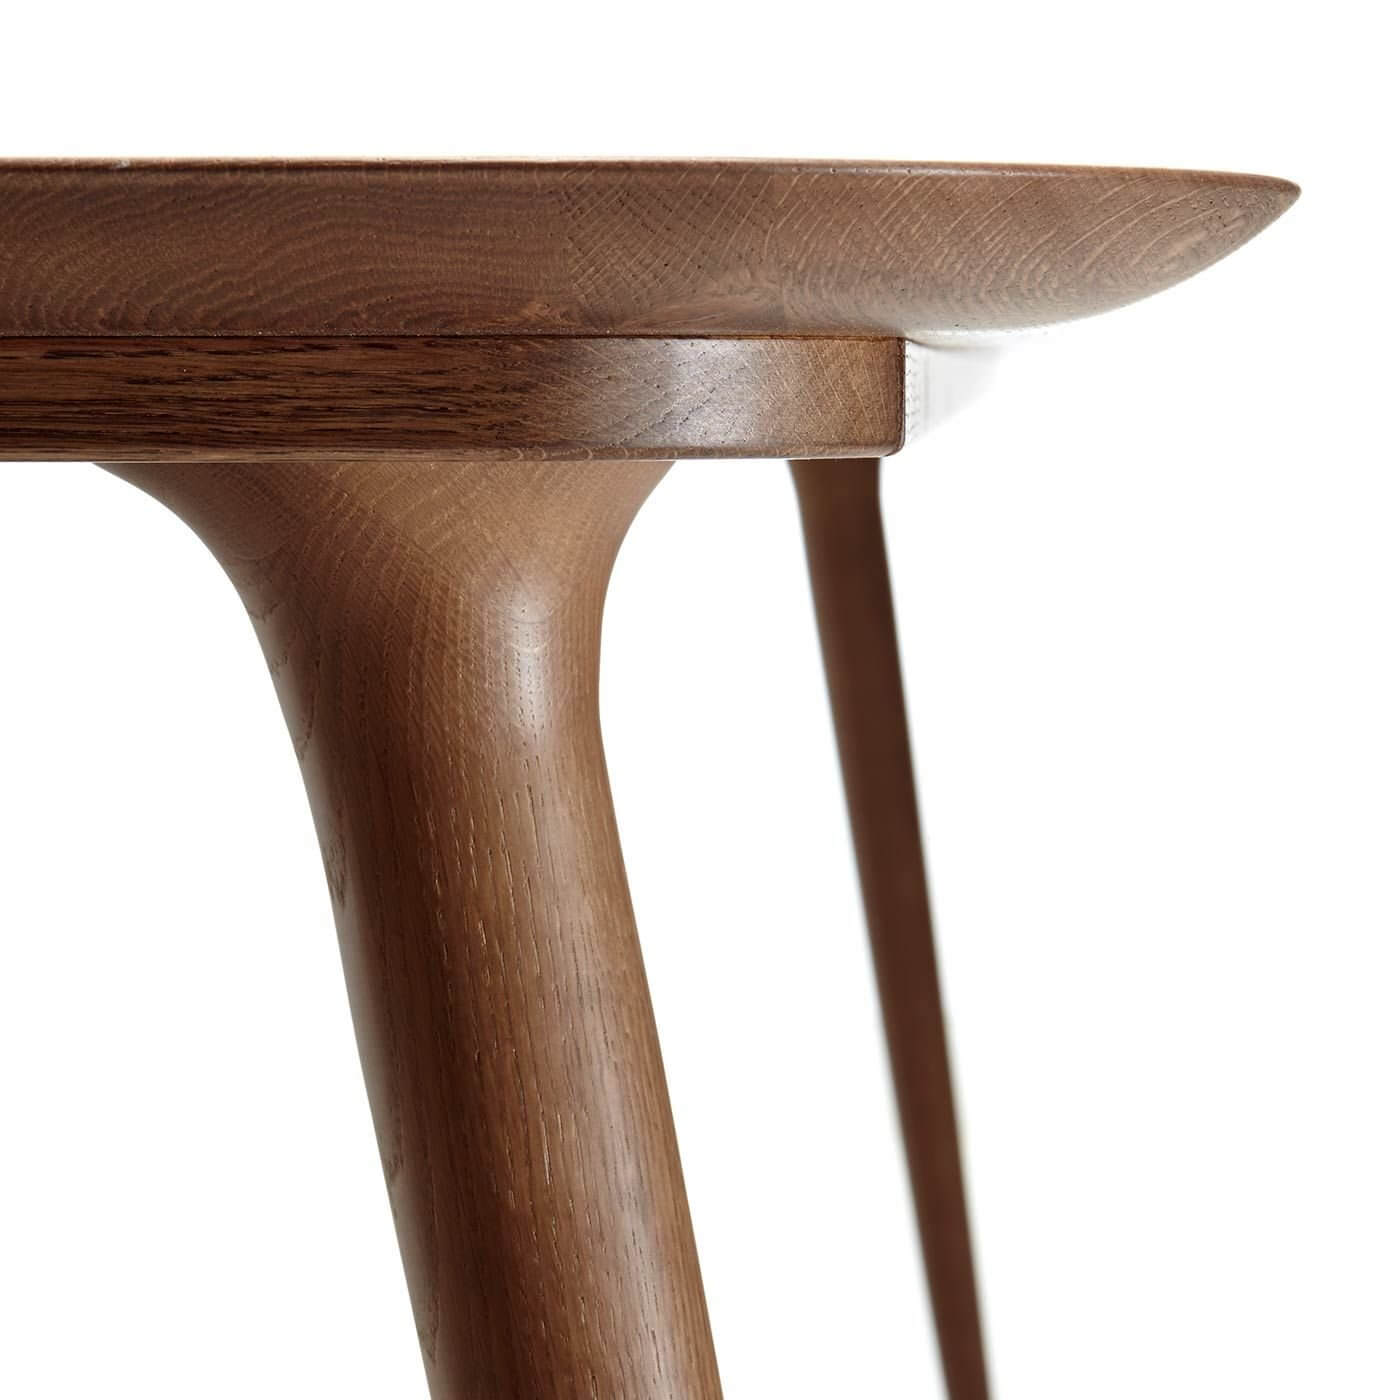 002 Moooi Zio Dining Table Tisch gross detail1 69694 braun e7f176f7c90337517d92f6a662e187f4 <strong>材質：</strong>高密度泡棉｜北美梣木｜牛皮or布面or布紋皮革or超膚感纖維皮料